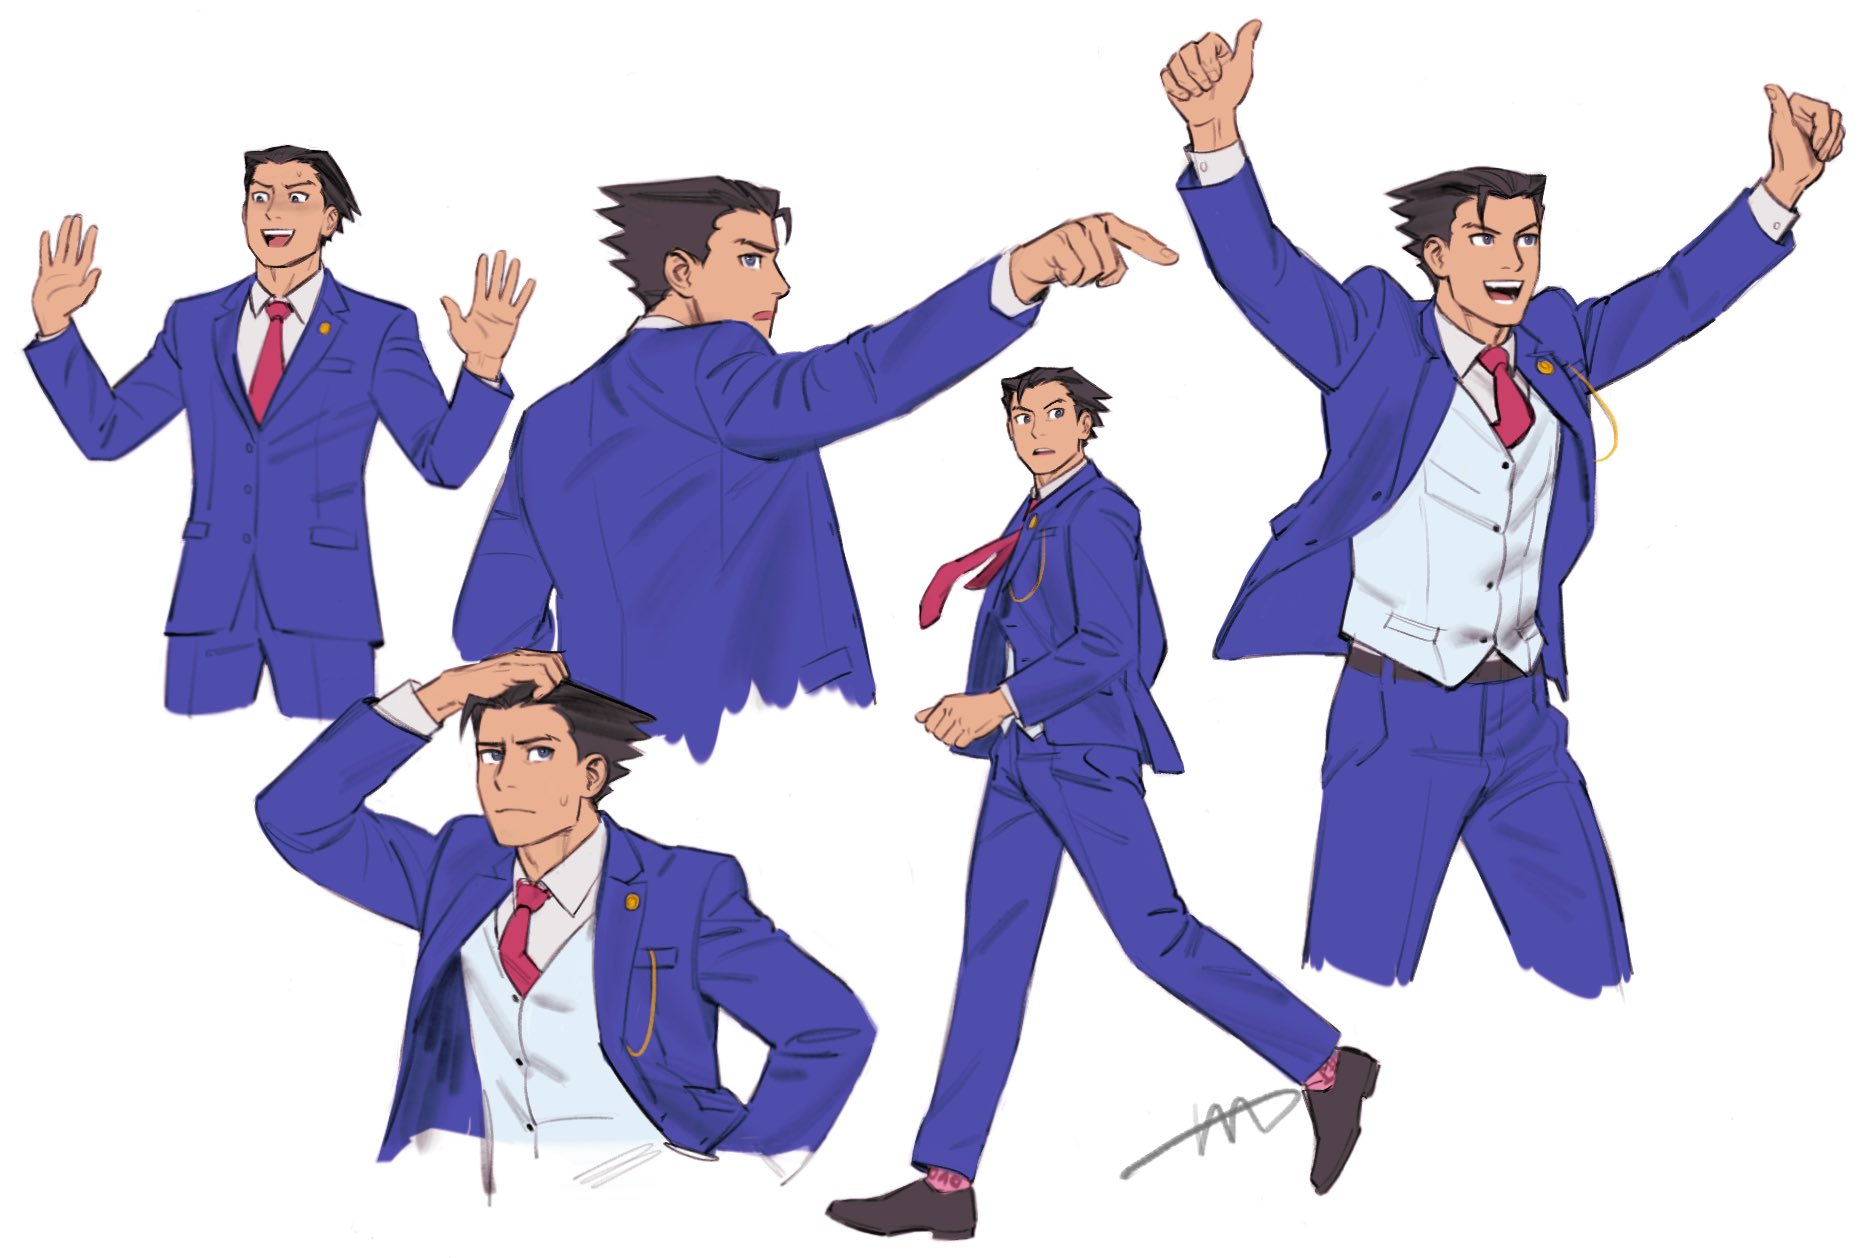 Fanart] Weeby doing the Ace Attorney lawyer pose ™ to celebrate her  starting the game tomorrow : r/Weebynewz